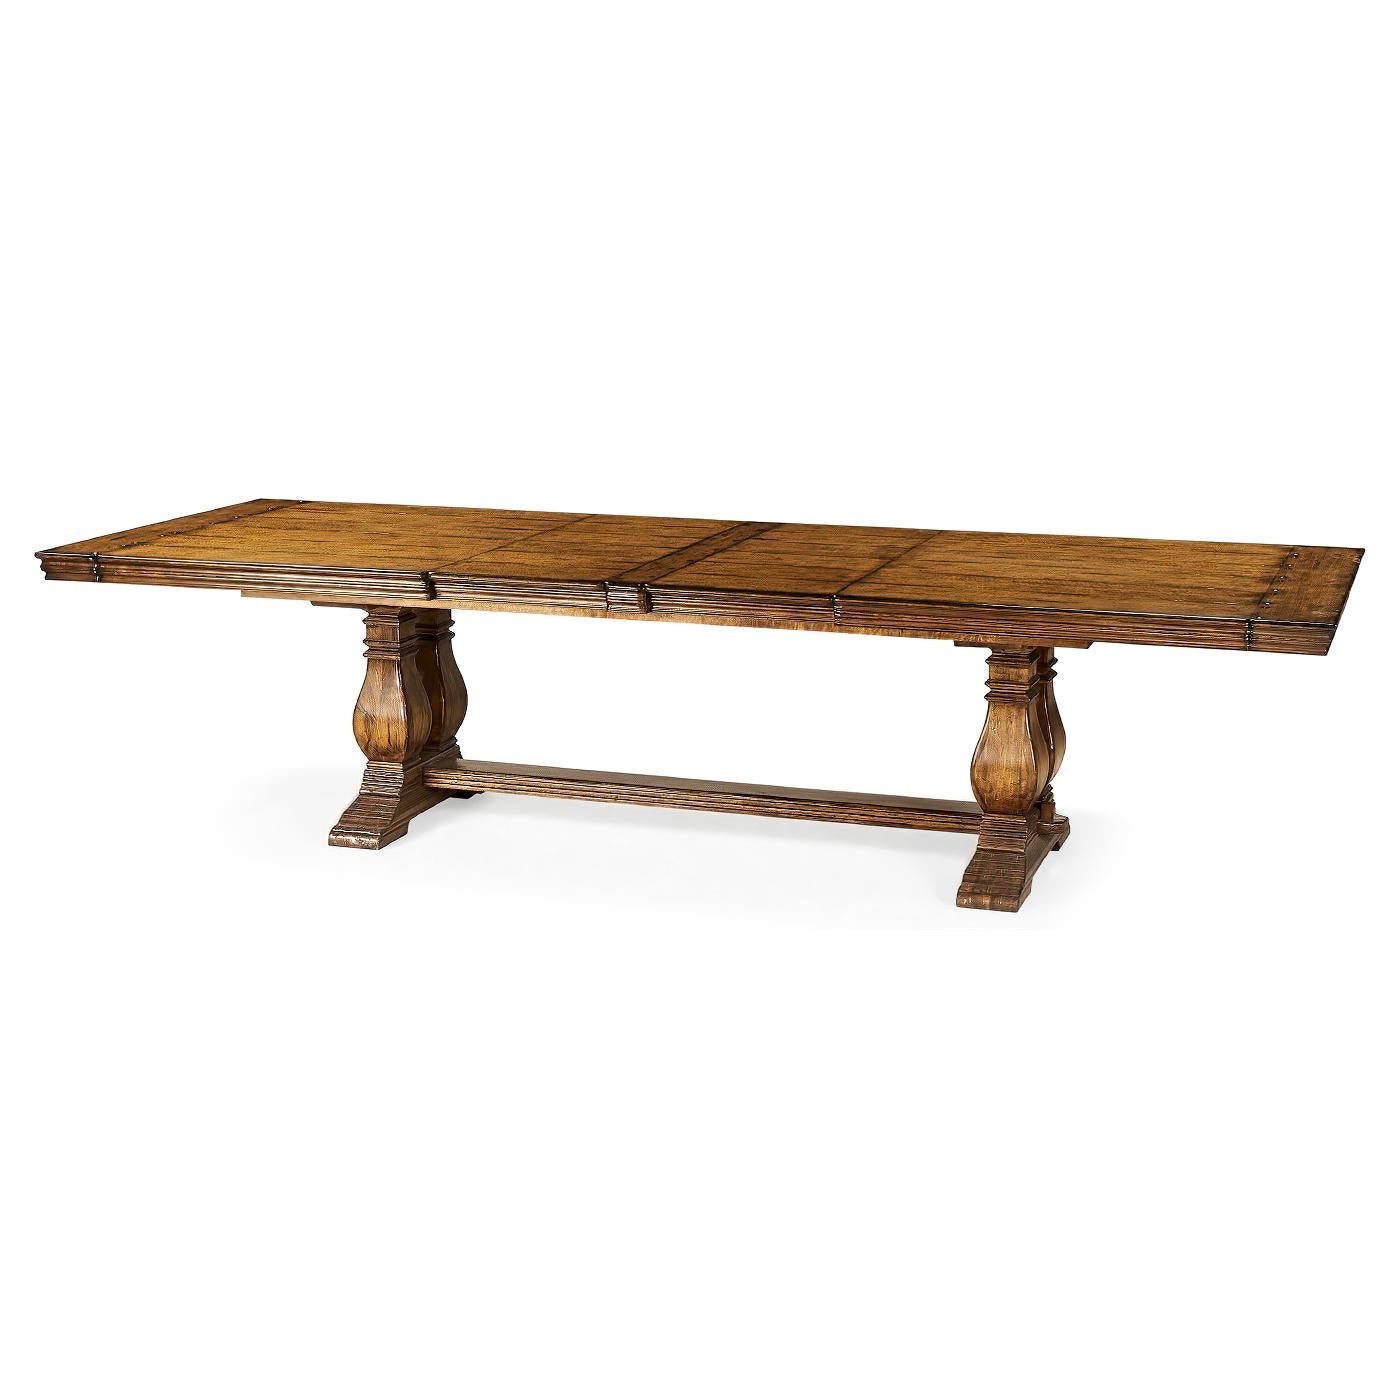 French Country draw leaf dining table French country style heavy planked extending figured walnut dining table with two self-storing leaves, an antique distressed double pedestal base, and a thick stretcher. 

Dimensions: 127.5